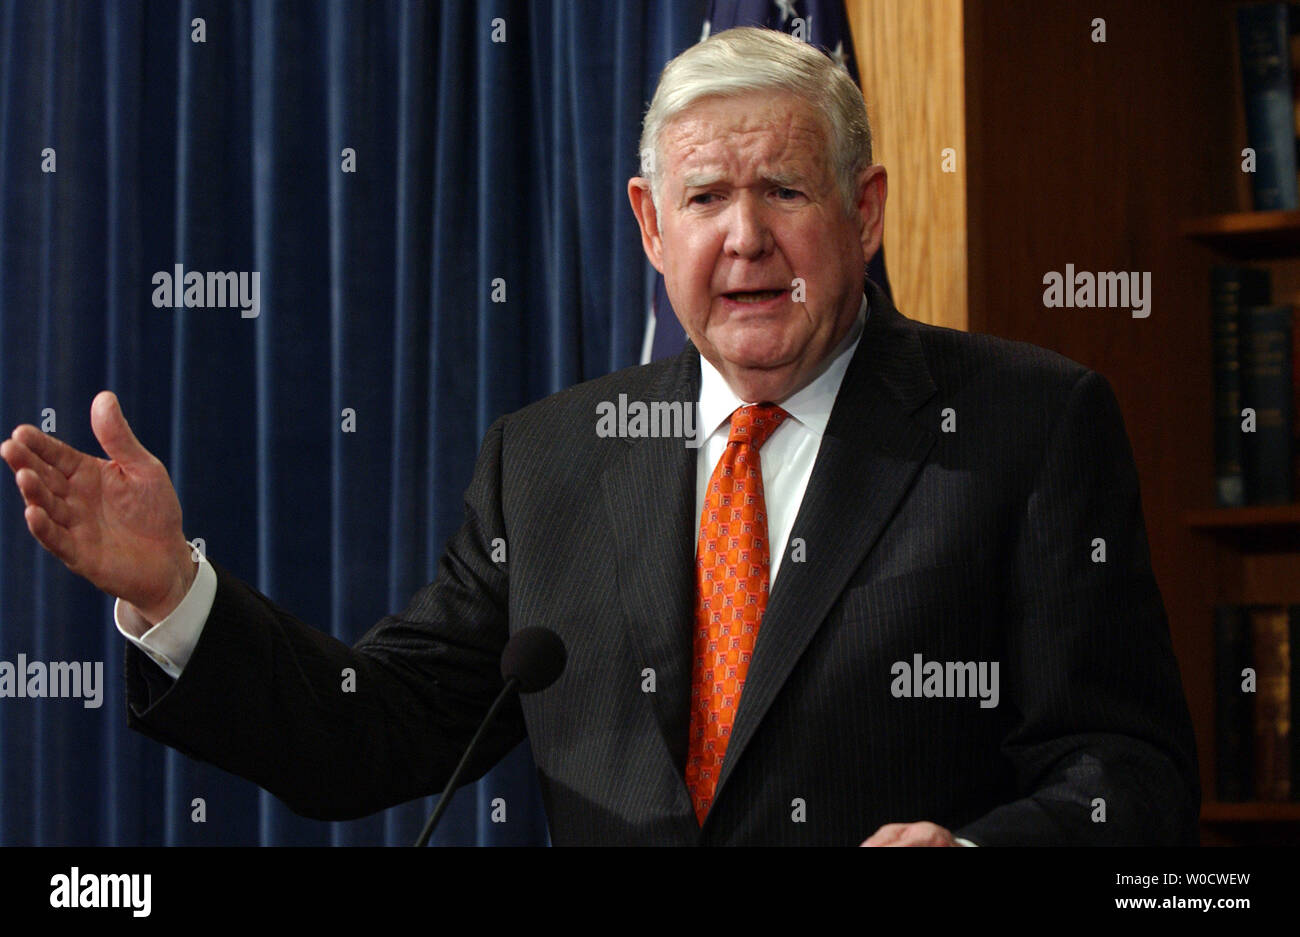 Rep. John Murtha, D-Pa., reacts to President Bush's speech on Iraq from earlier in the day during a news conference on Capitol Hill in Washington on December 7, 2005. Murtha reiterated his call for the U.S. to begin immediately withdrawing its troops because they are making the situation worse, not better.   (UPI Photo/Roger L. Wollenberg) Stock Photo